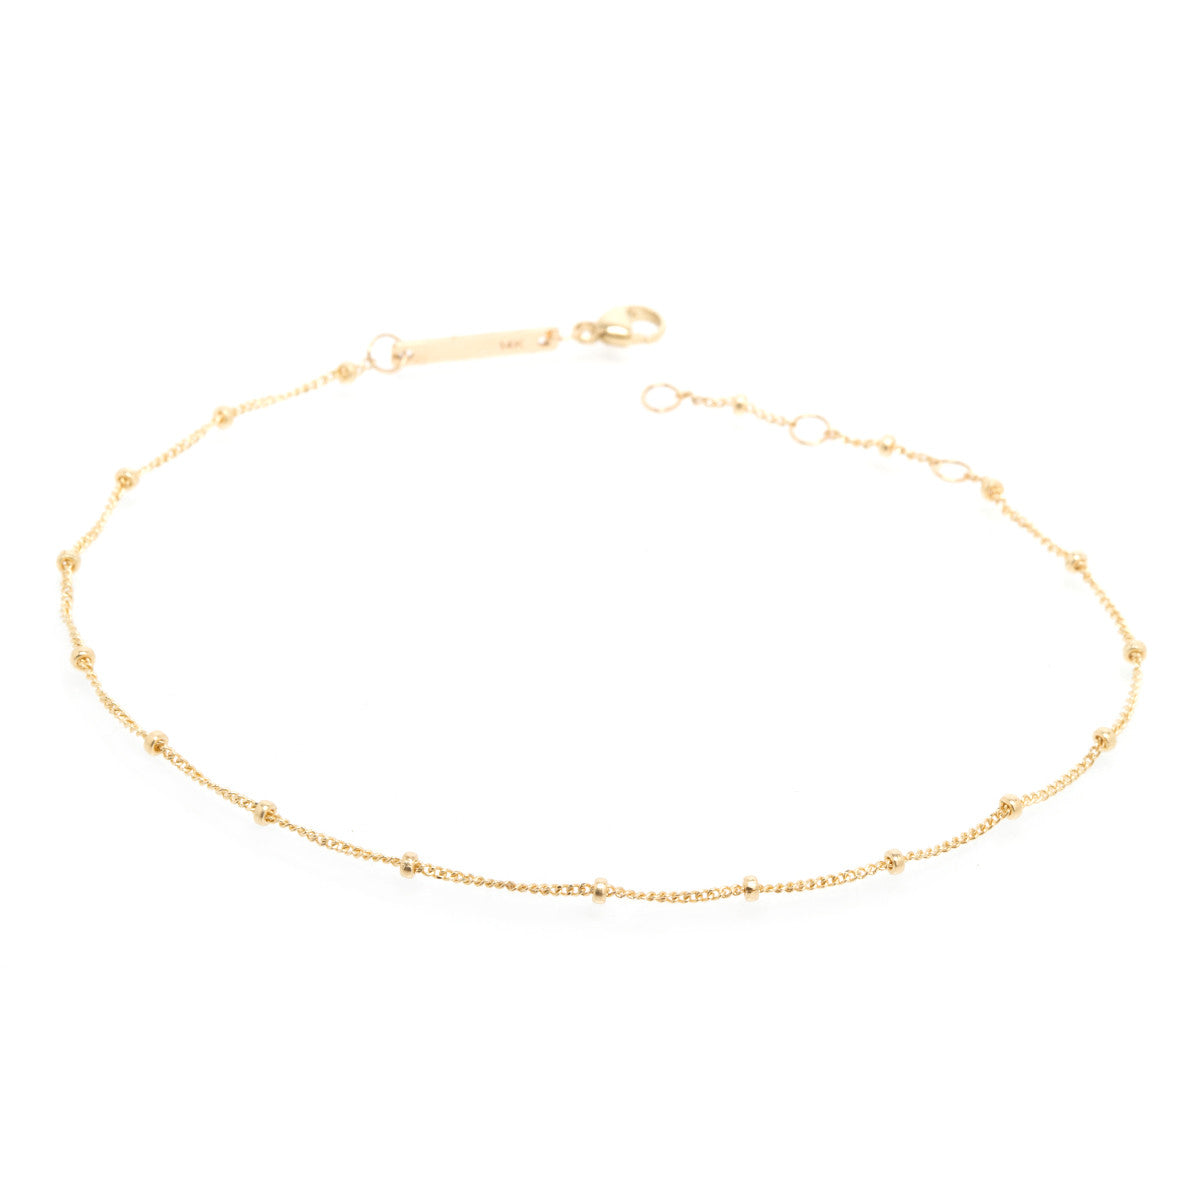 Zoë Chicco Rope Chain Anklet in 14K Yellow Gold